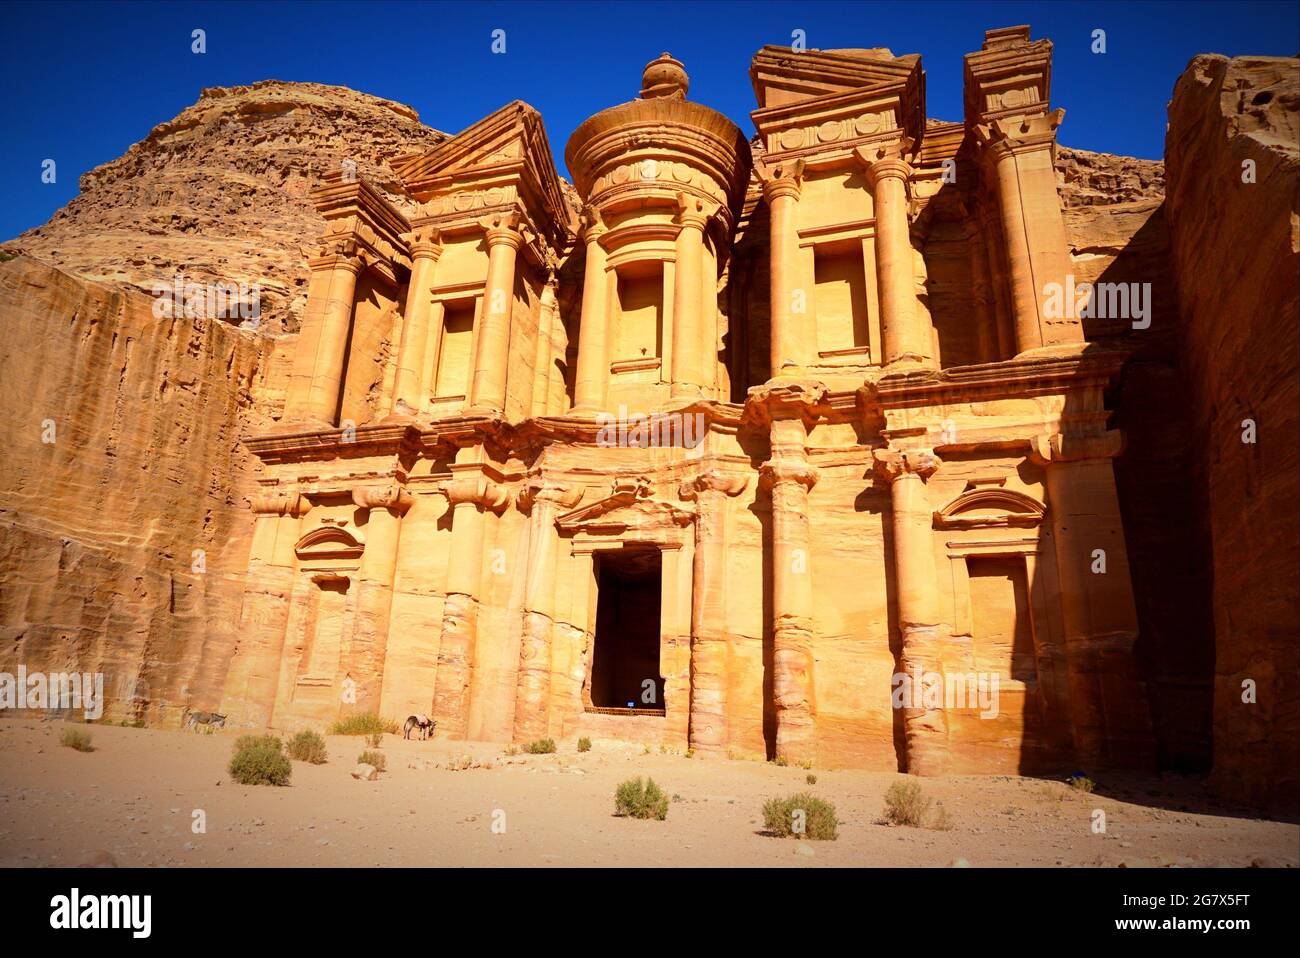 Petra is a symbol of Jordan, as well as Jordan's most-visited tourist attraction. Named one of the New Seven Wonders of the World. Stock Photo